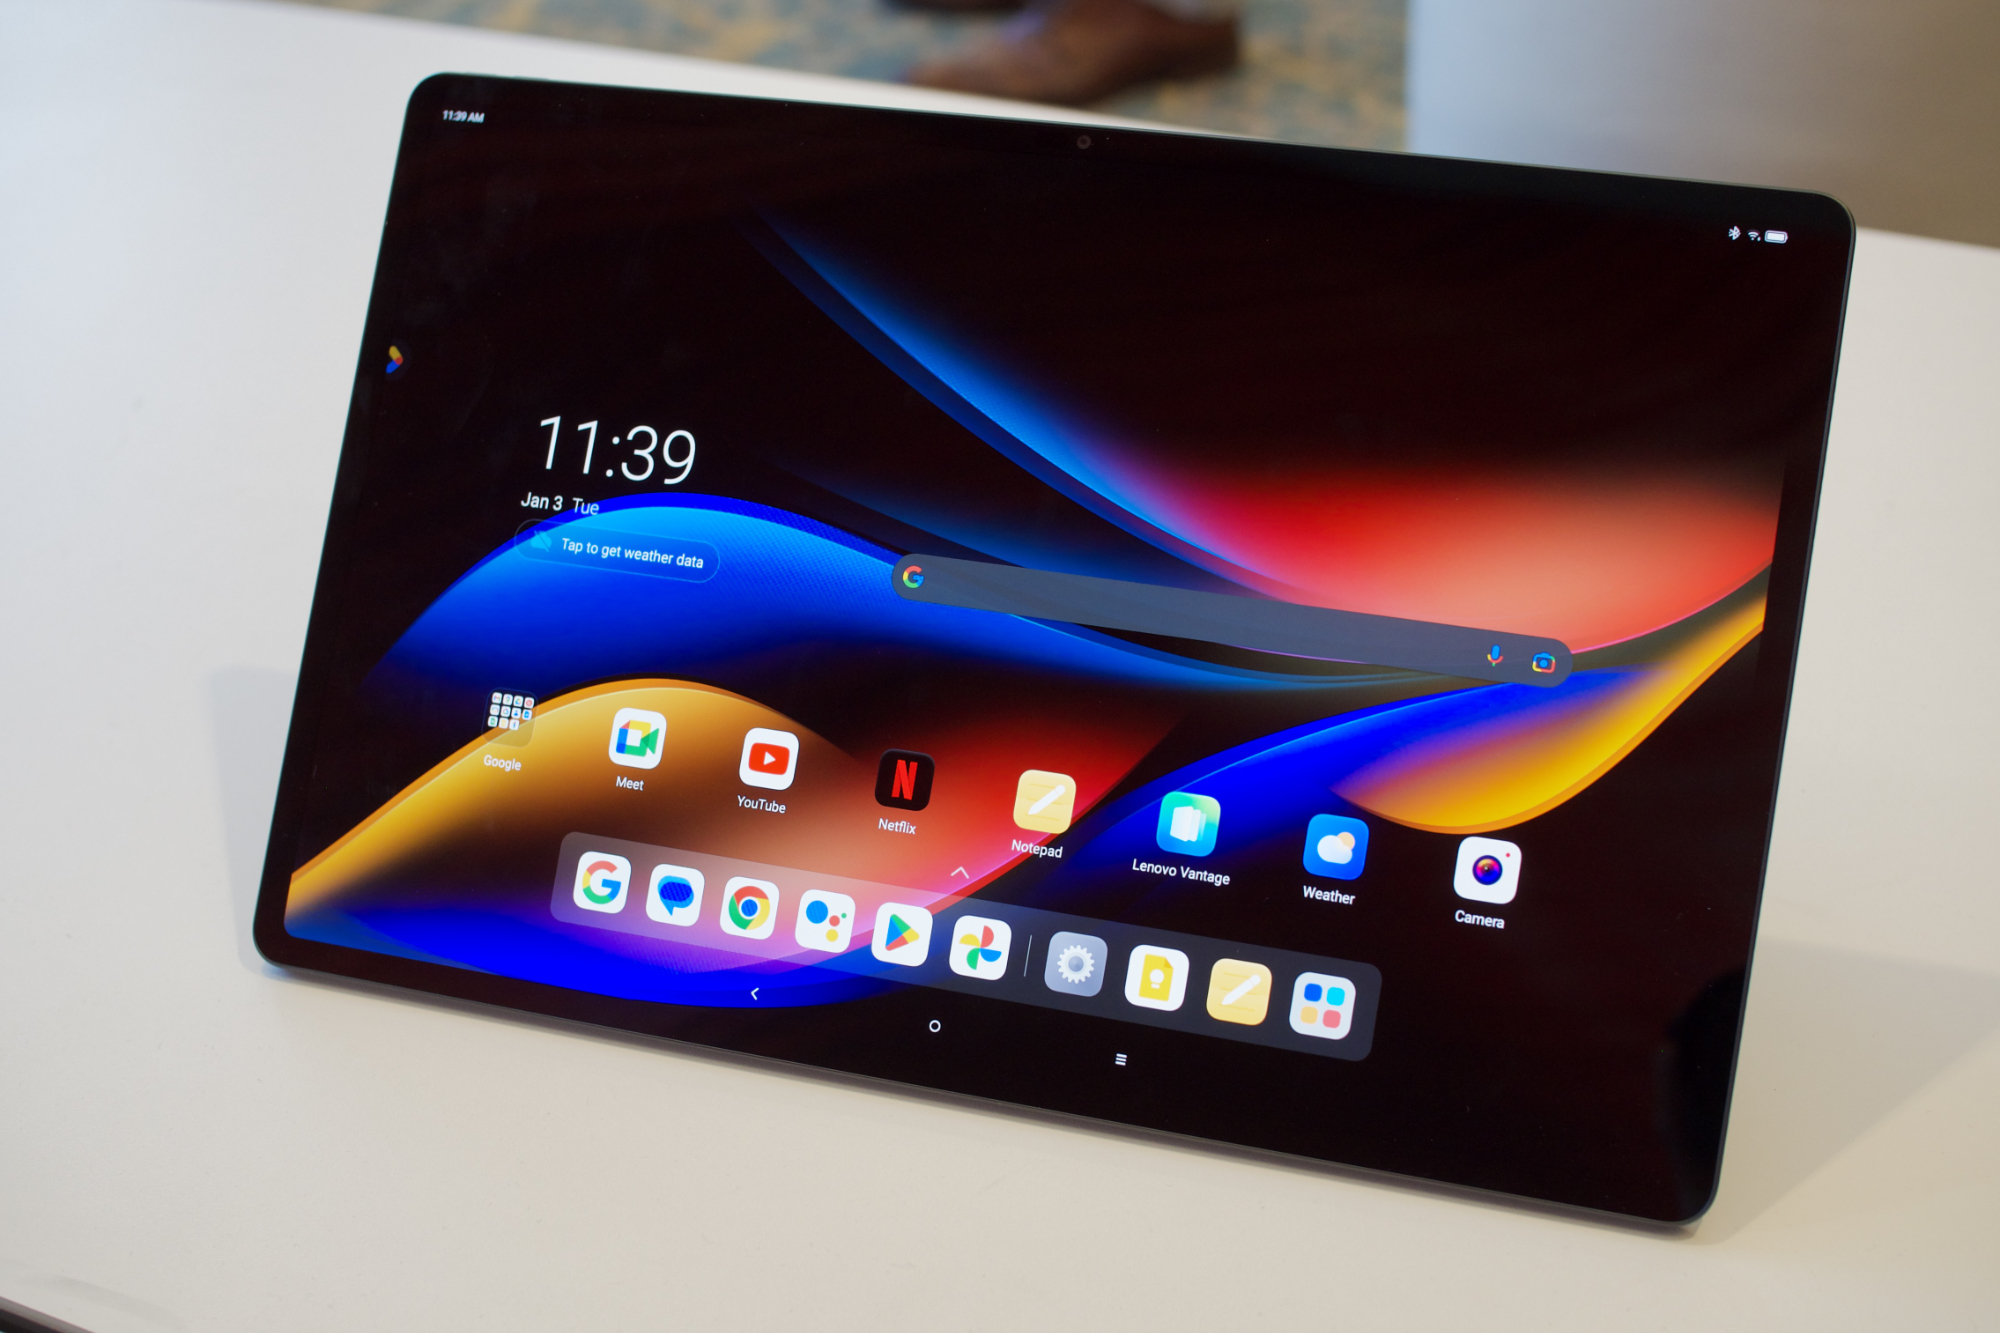 Introducing the new Lenovo Tab P12 and Tab M10 5G consumer tablets